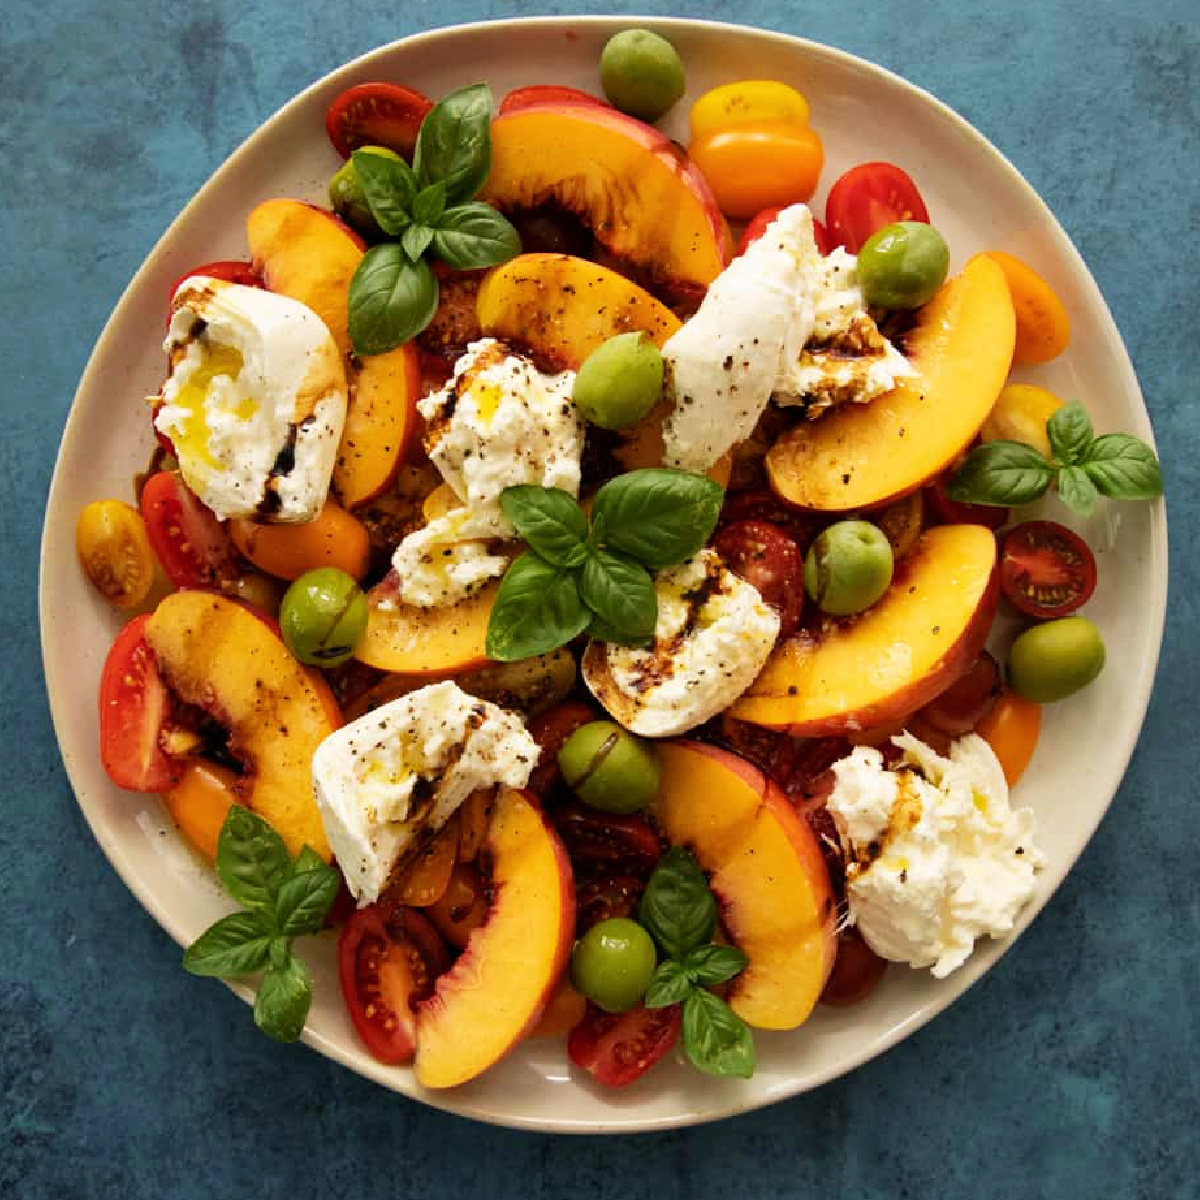 Creamy burrata with tomatoes and peaches present a delightful combination of flavors, ready in just 10 minutes. I drizzle it with balsamic glaze and serve it with crusty toasted bread as a salad or an appetizer. This dish is the perfect addition to any table!
